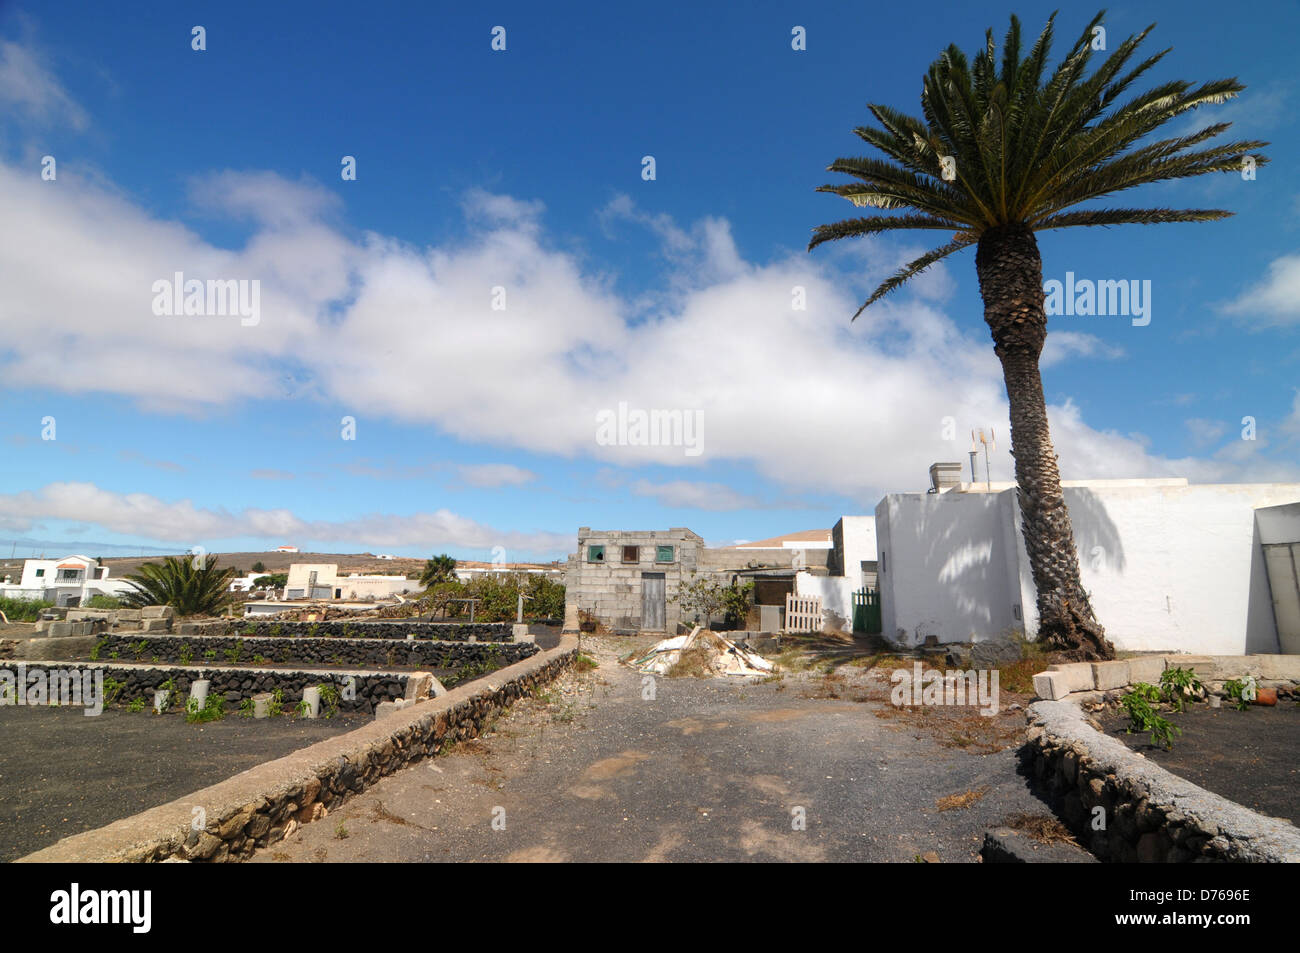 Road and a Palm on a cloudy sky ,in Lanzarote, Spain Stock Photo